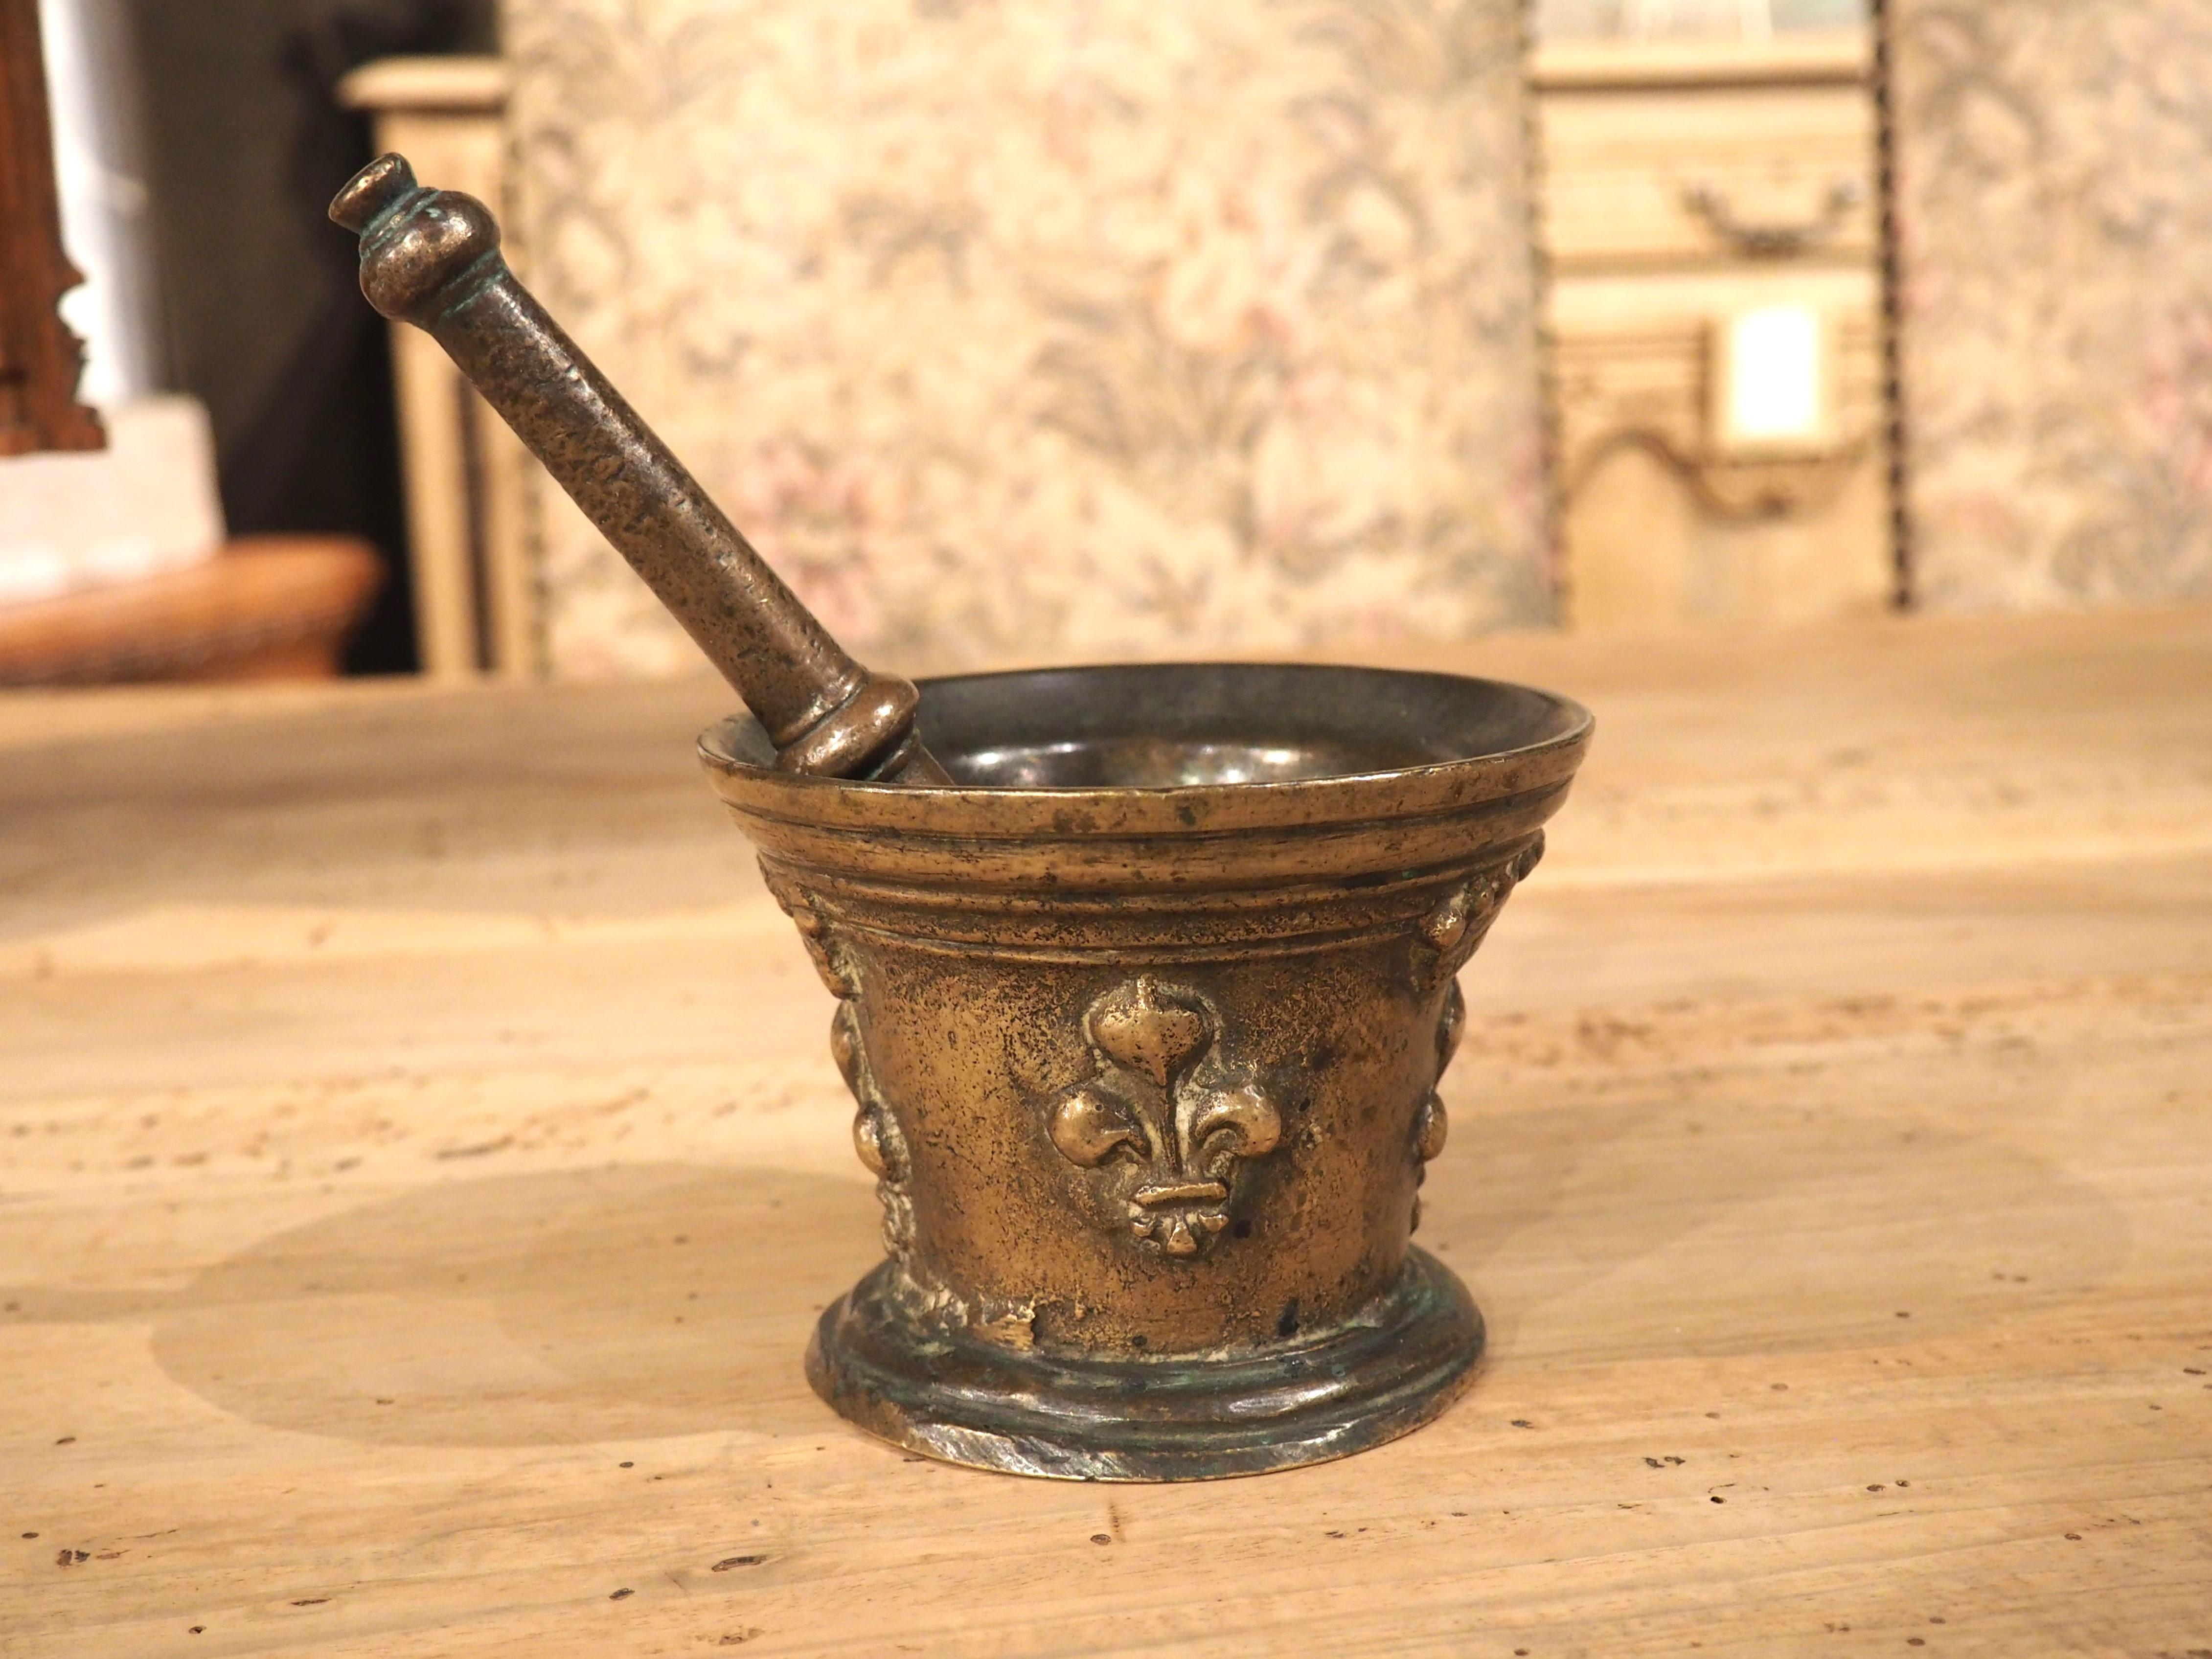 This small bronze mortar and pestle are from France, circa 1700. The circular opening has several layers of molding, with the bottom three interrupted by a pair of open crowns on opposing sides. Both crowns have a fleur de lys beneath it, with two